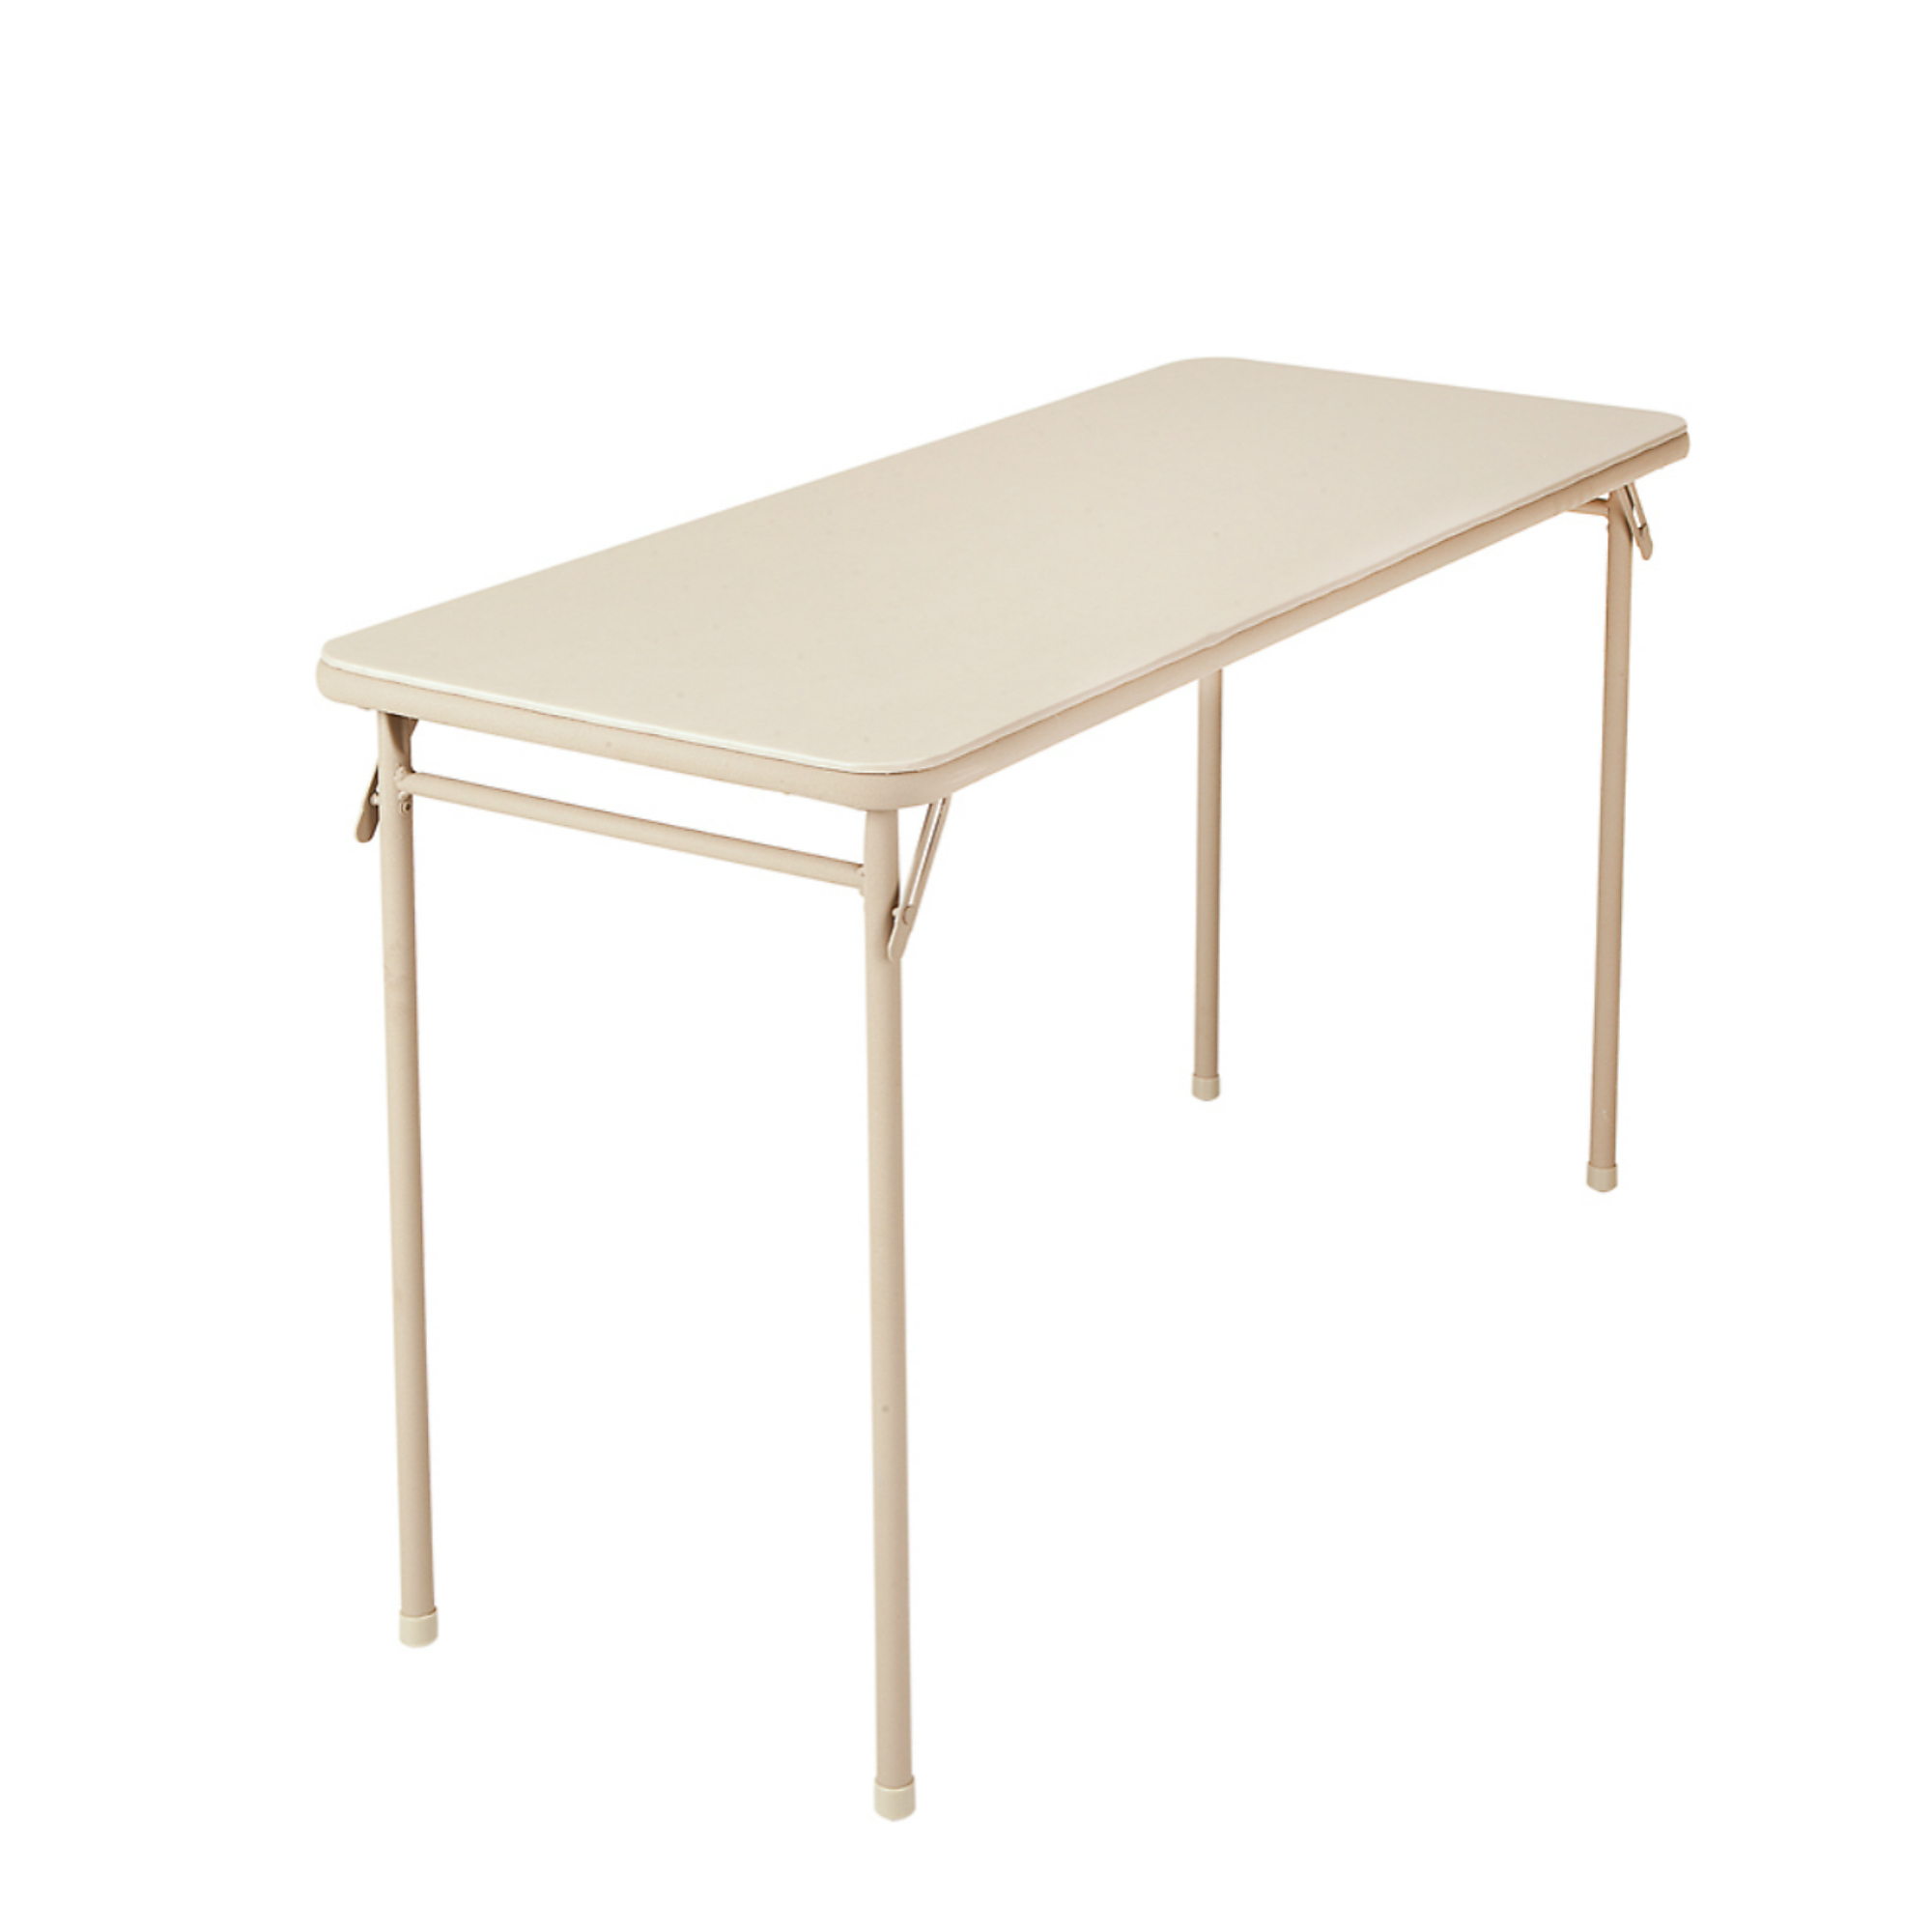 Cosco, 20Inch x 48Inch Vinyl Top Serving Folding Table, Height 28 in, Width 20 in, Length 48 in, Model 14341ANT1E